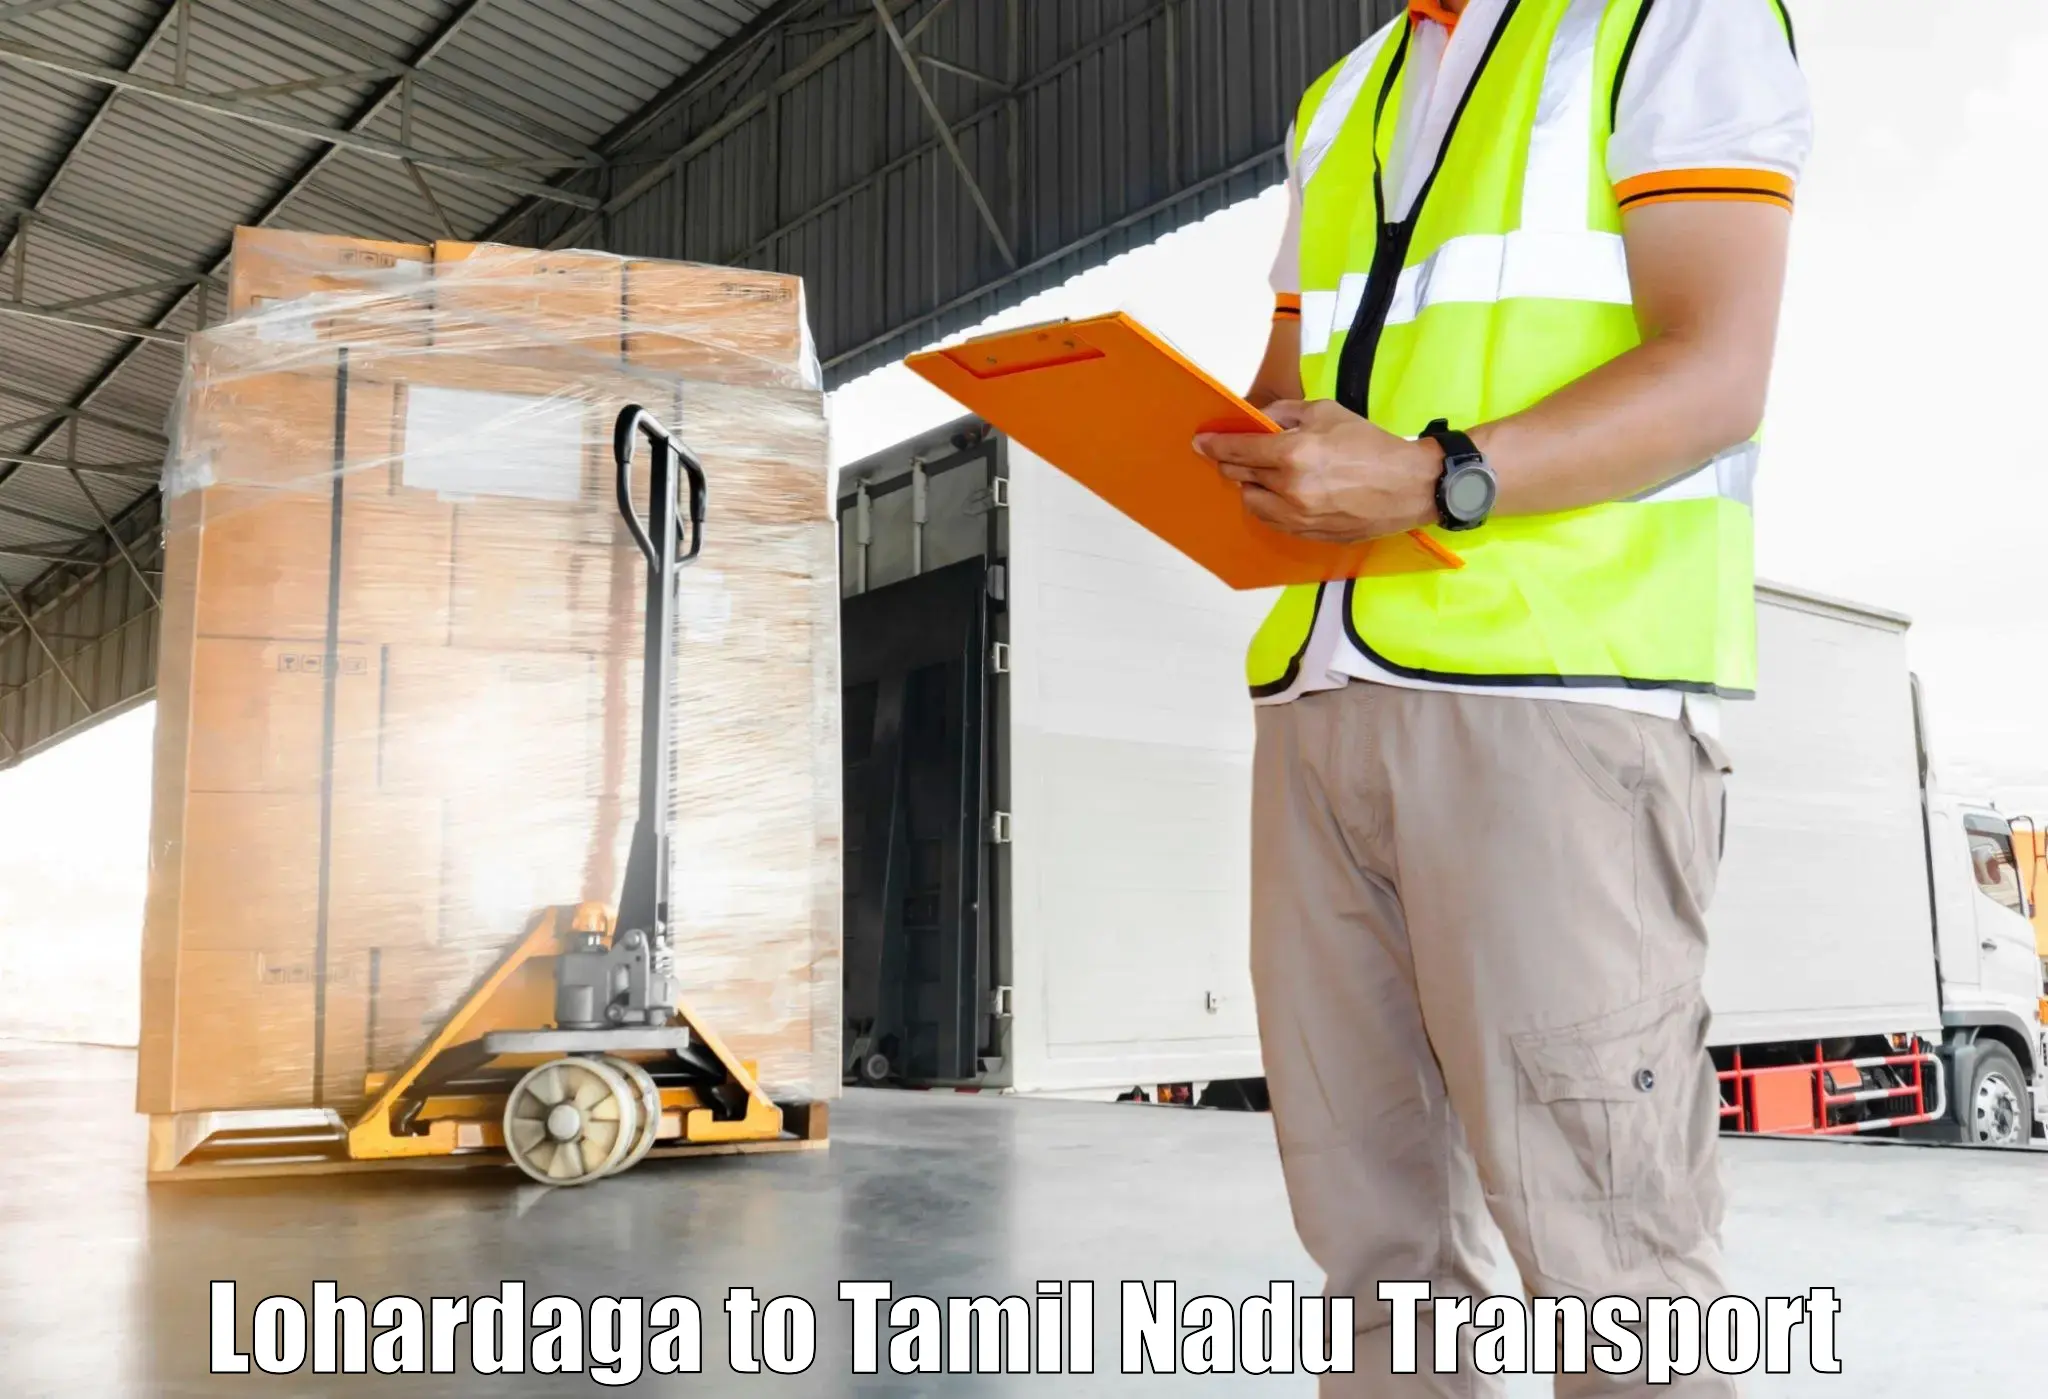 Parcel transport services Lohardaga to Shanmugha Arts Science Technology and Research Academy Thanjavur